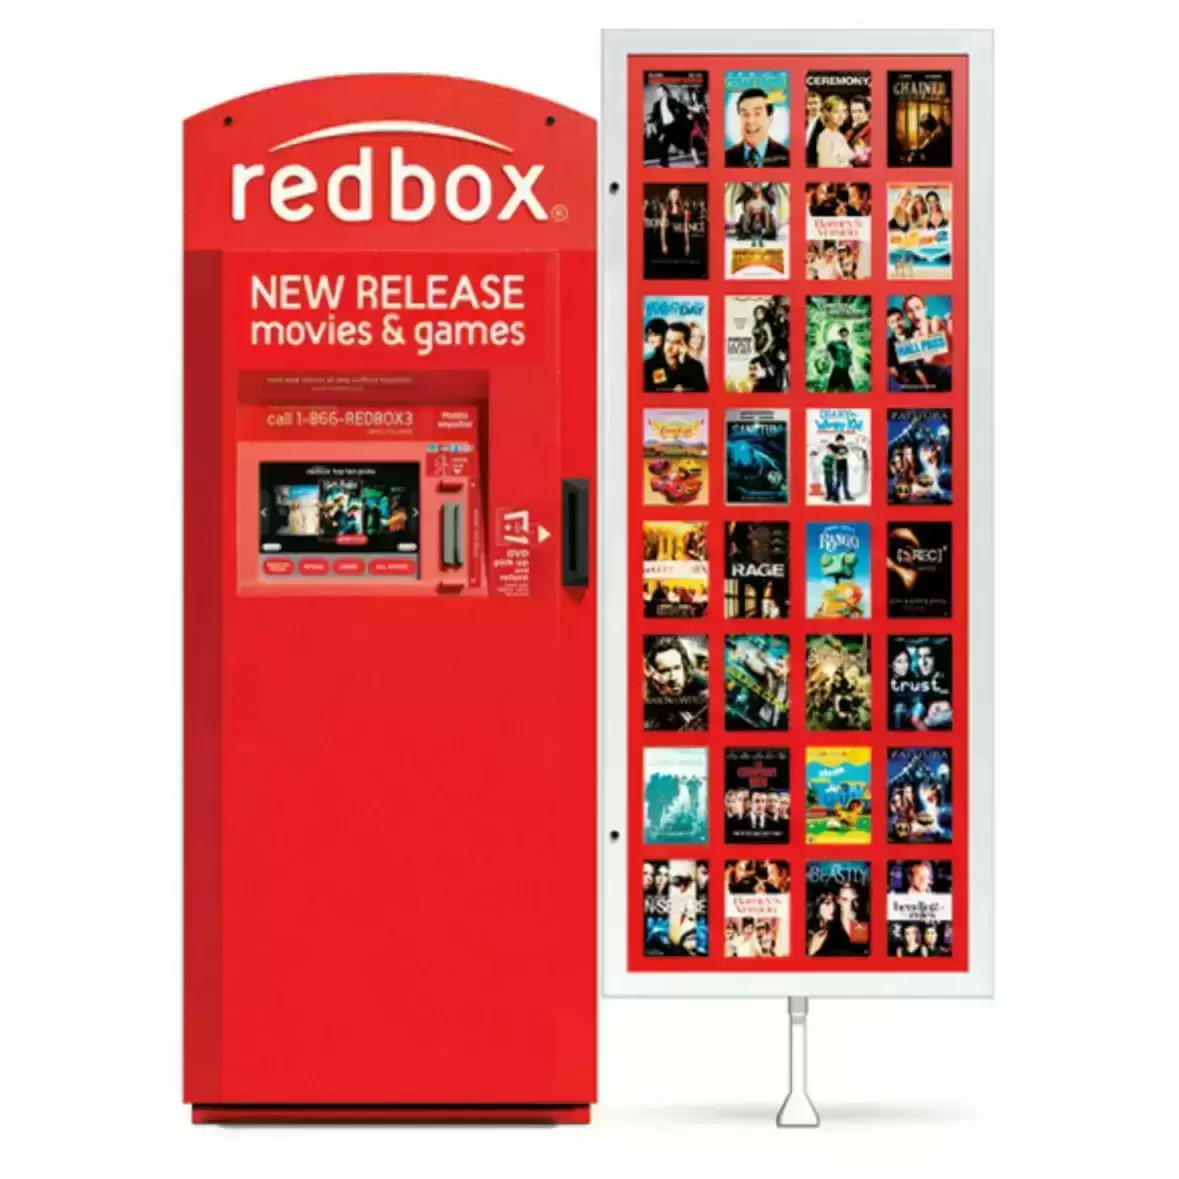 Free Redbox Blu-ray or DVD Movie Code with Coupon Promo Code BD83FH12